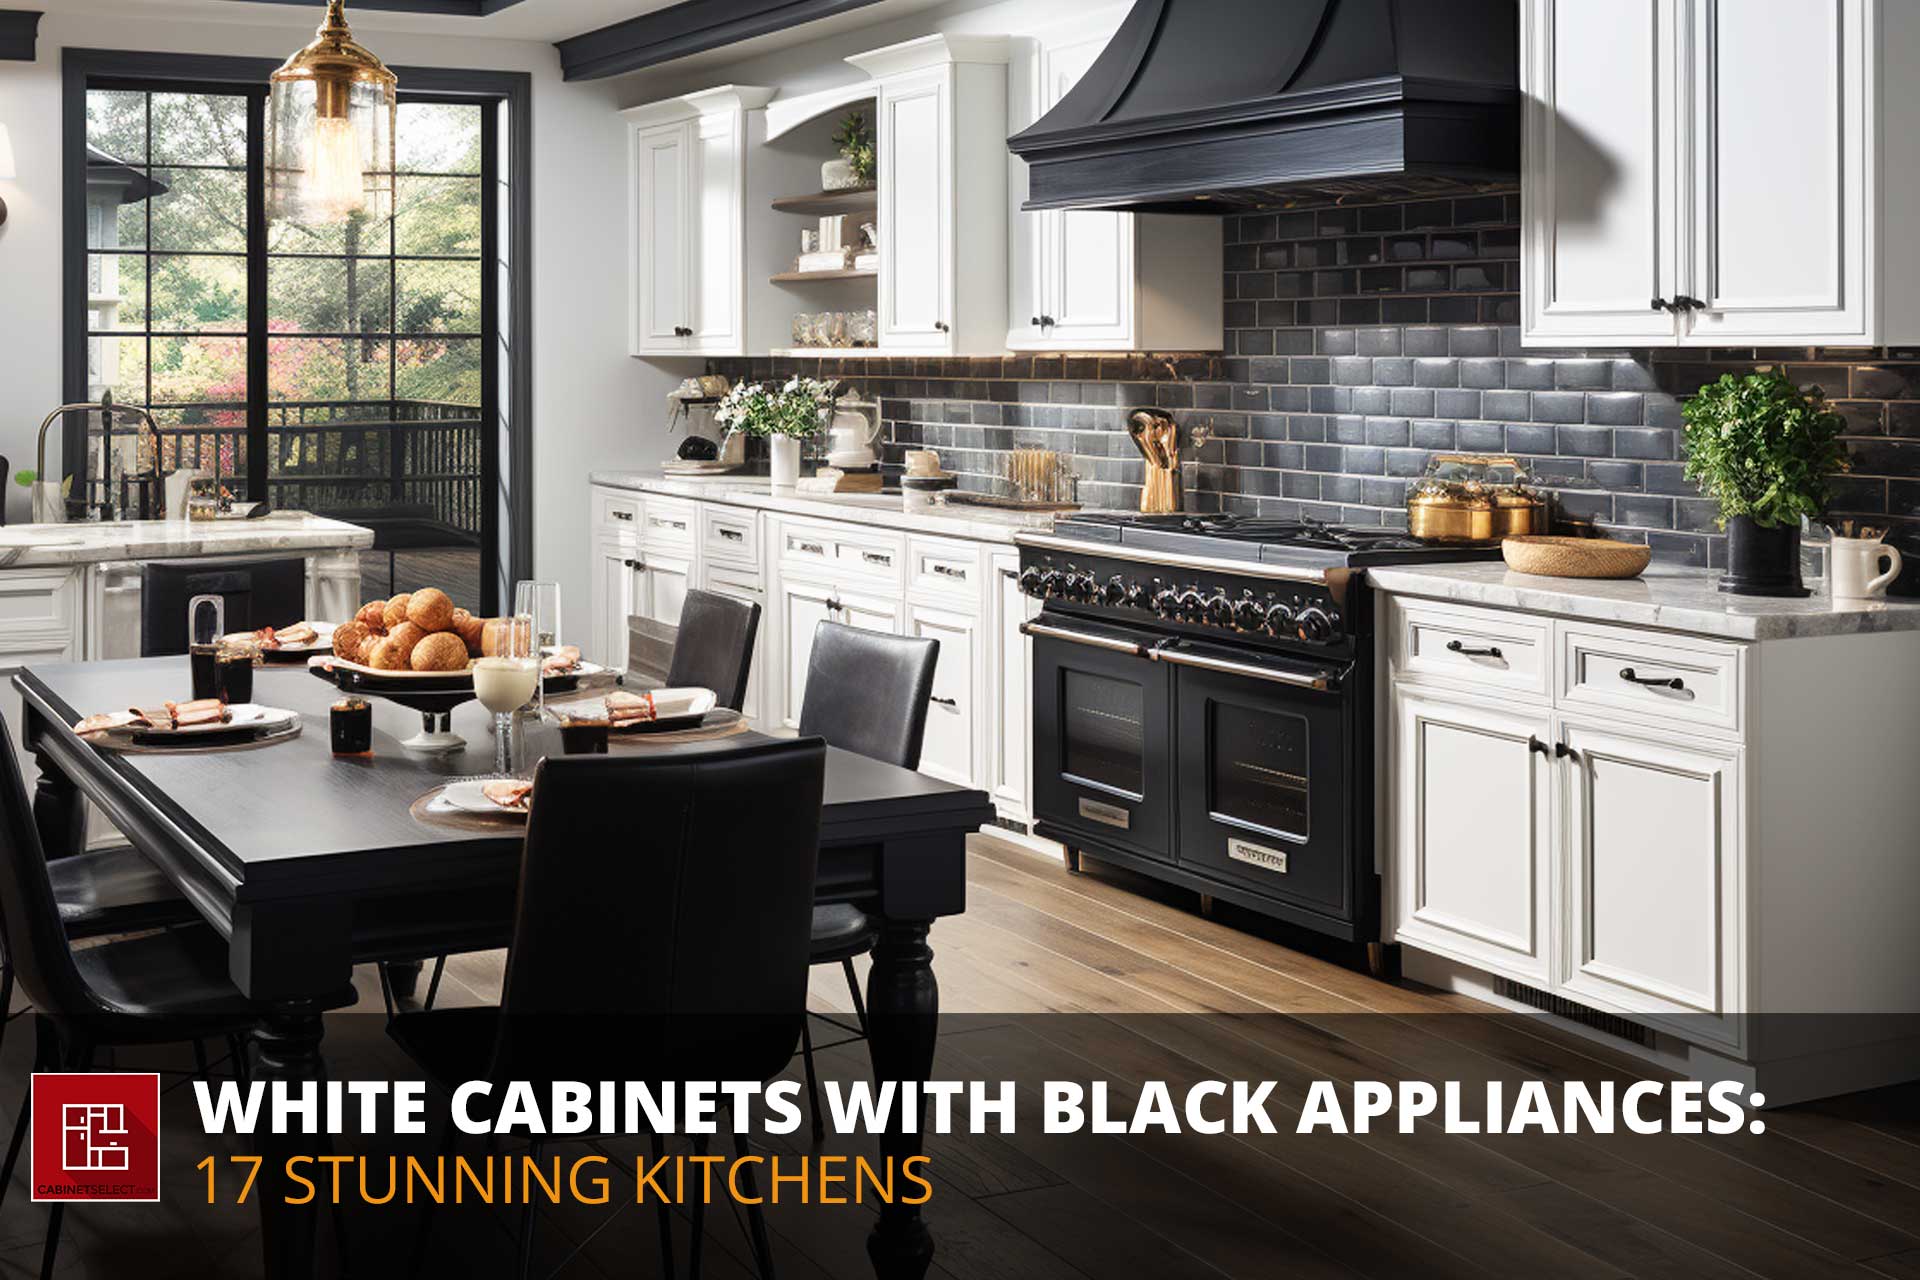 https://cabinetselect.com/cswp/wp-content/uploads/2023/08/White-Cabinets-Black-Appliances-Featured-Image.jpg